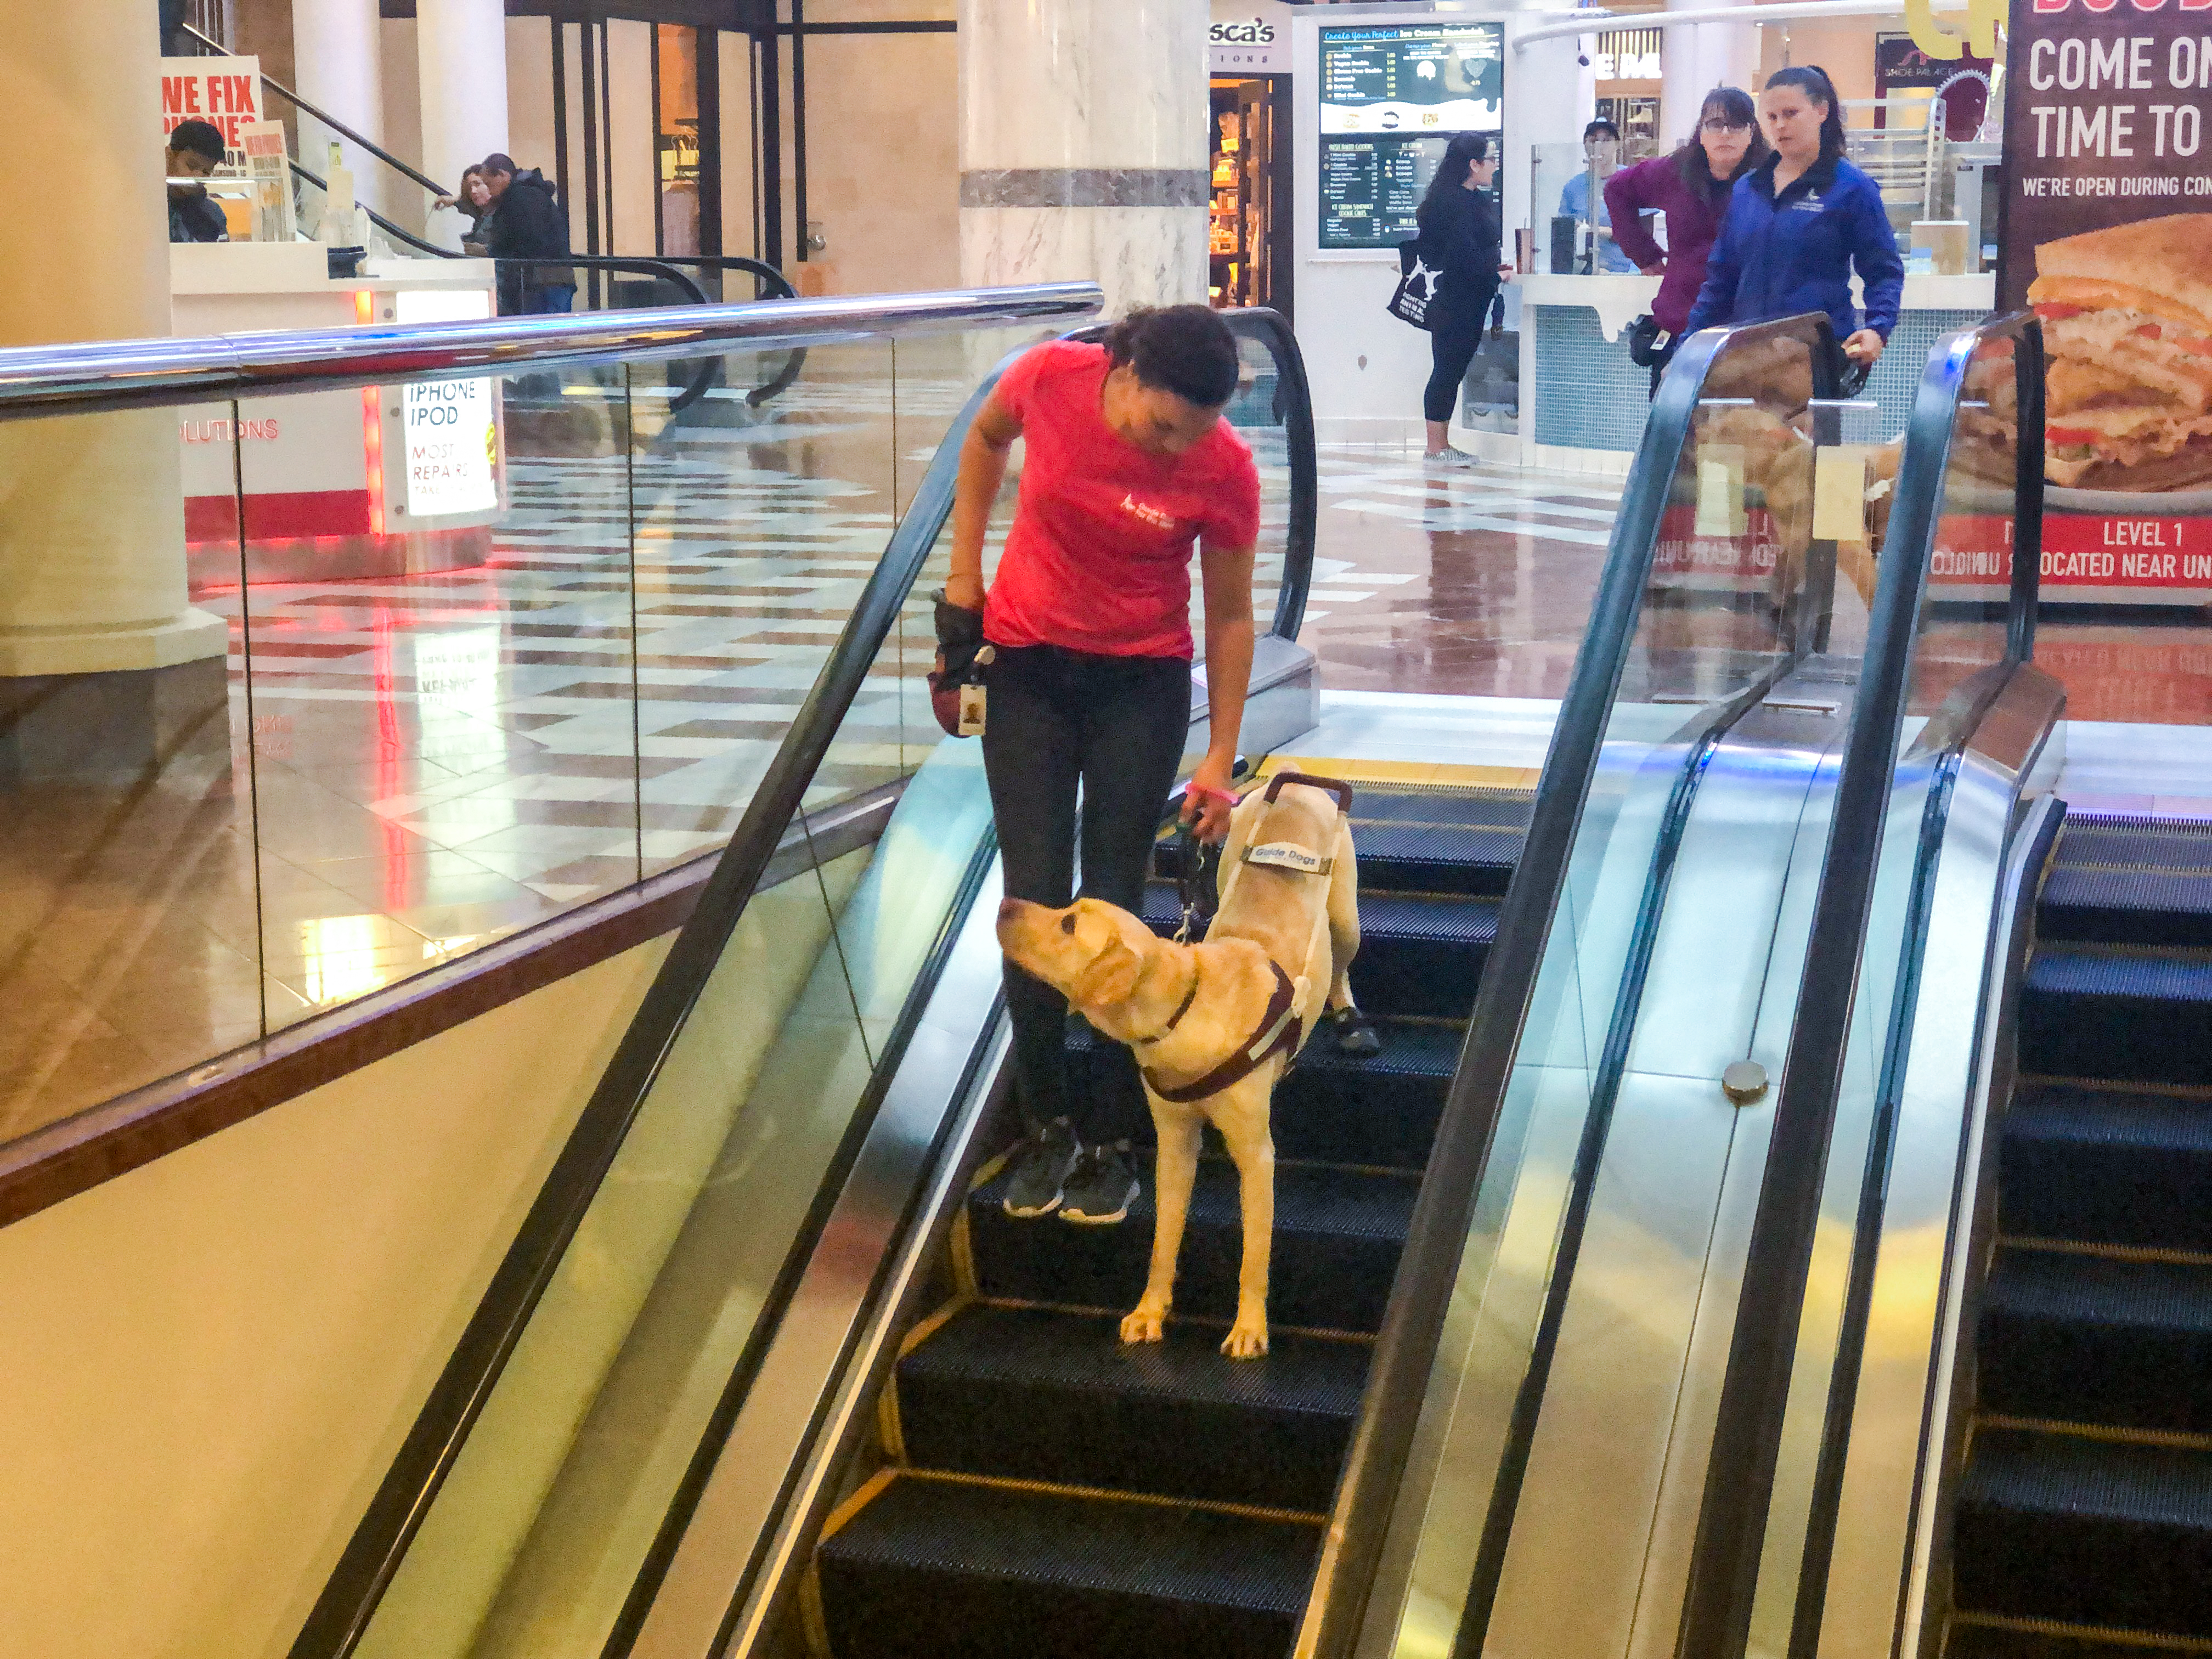 A GDB staff member teaches a yellow Lab guide dog in training how to travel on an escalator in a mall.